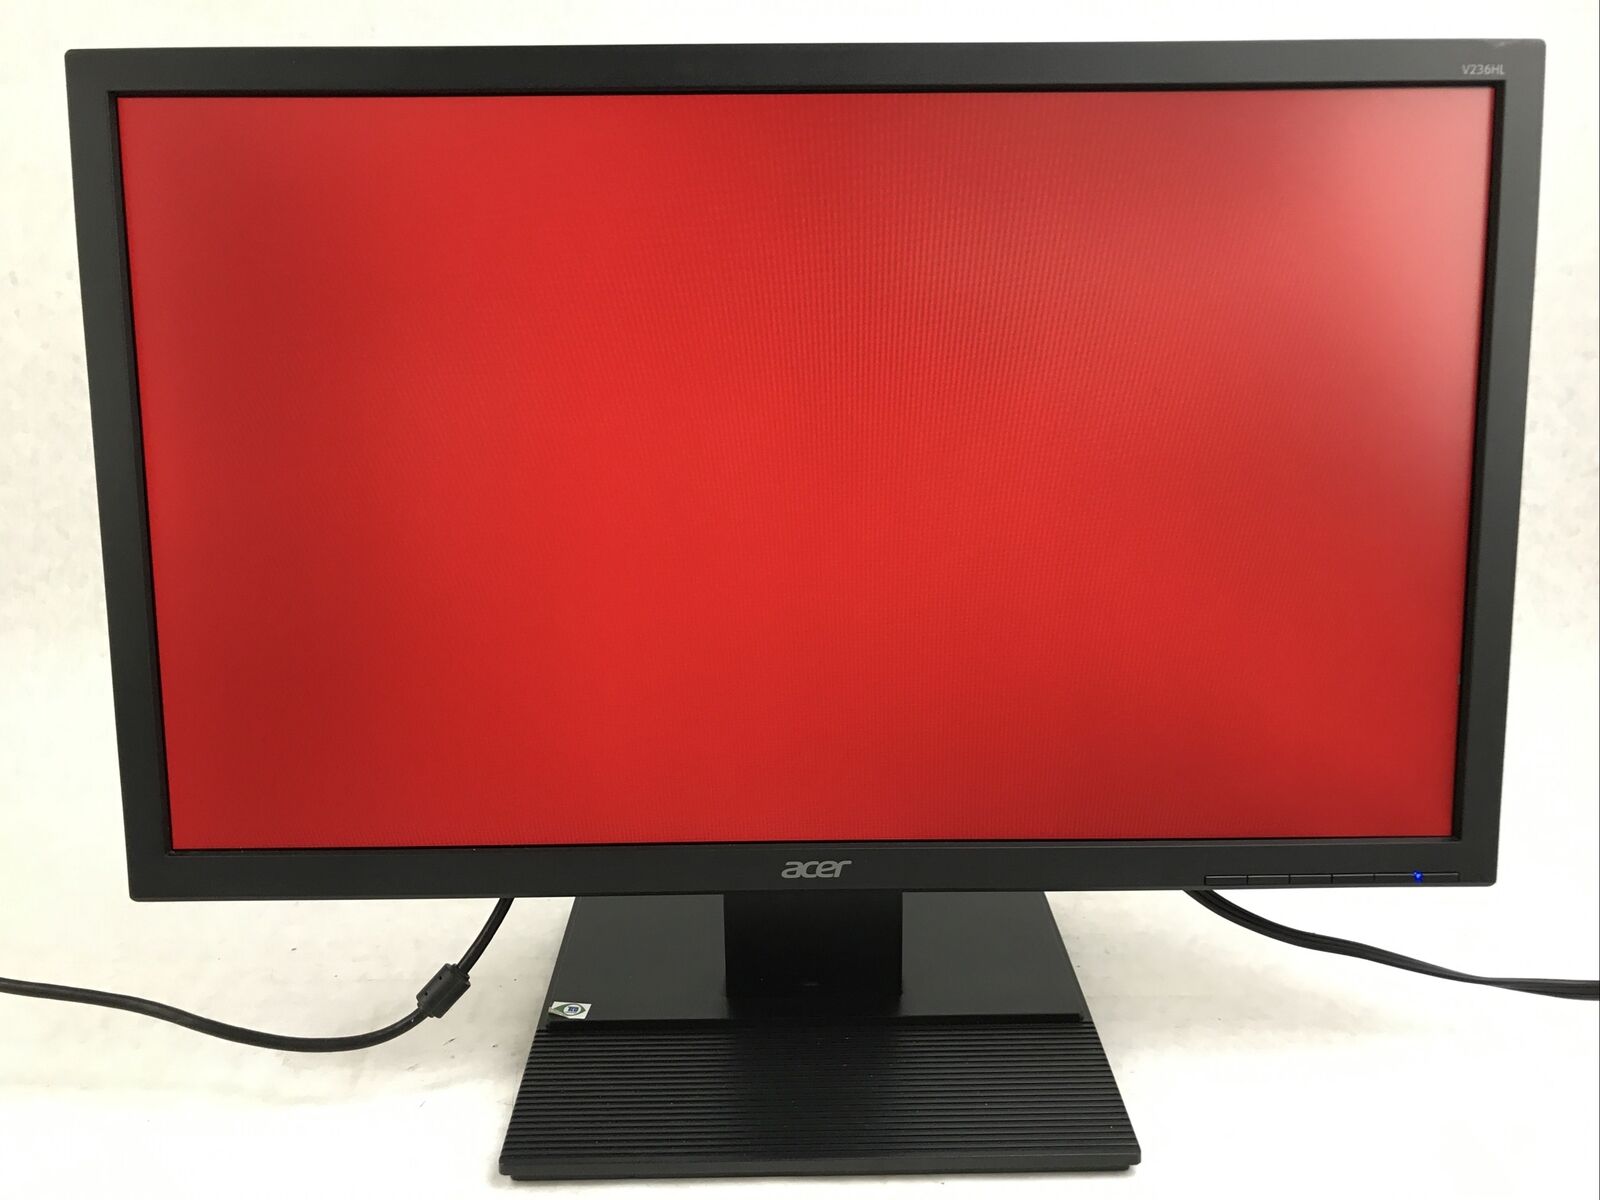 Acer V236HL 23” Full HD Monitor with Power Cord - Grade B Monitor